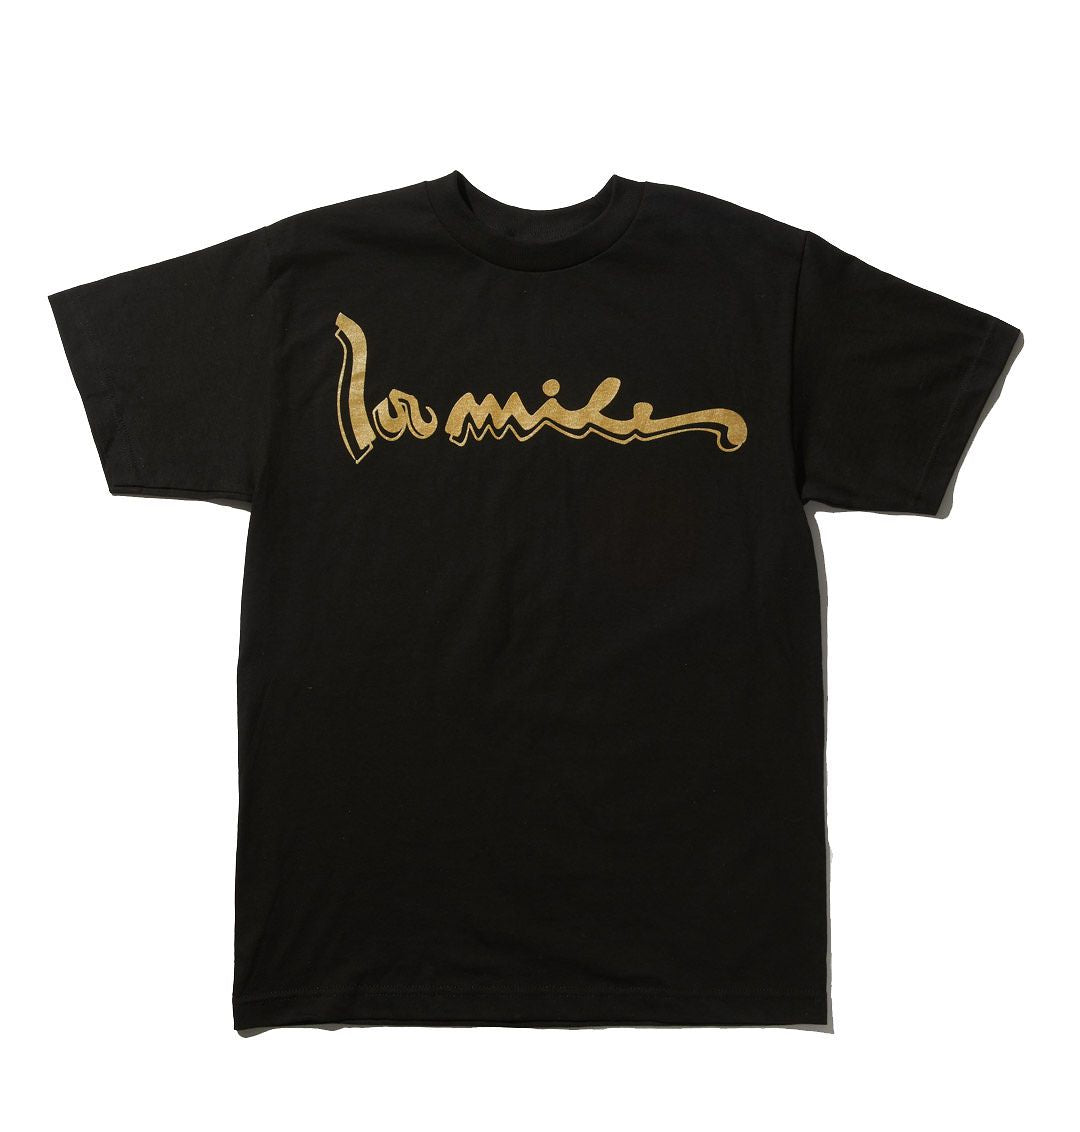 100 Miles Signature Black and Gold T-Shirt